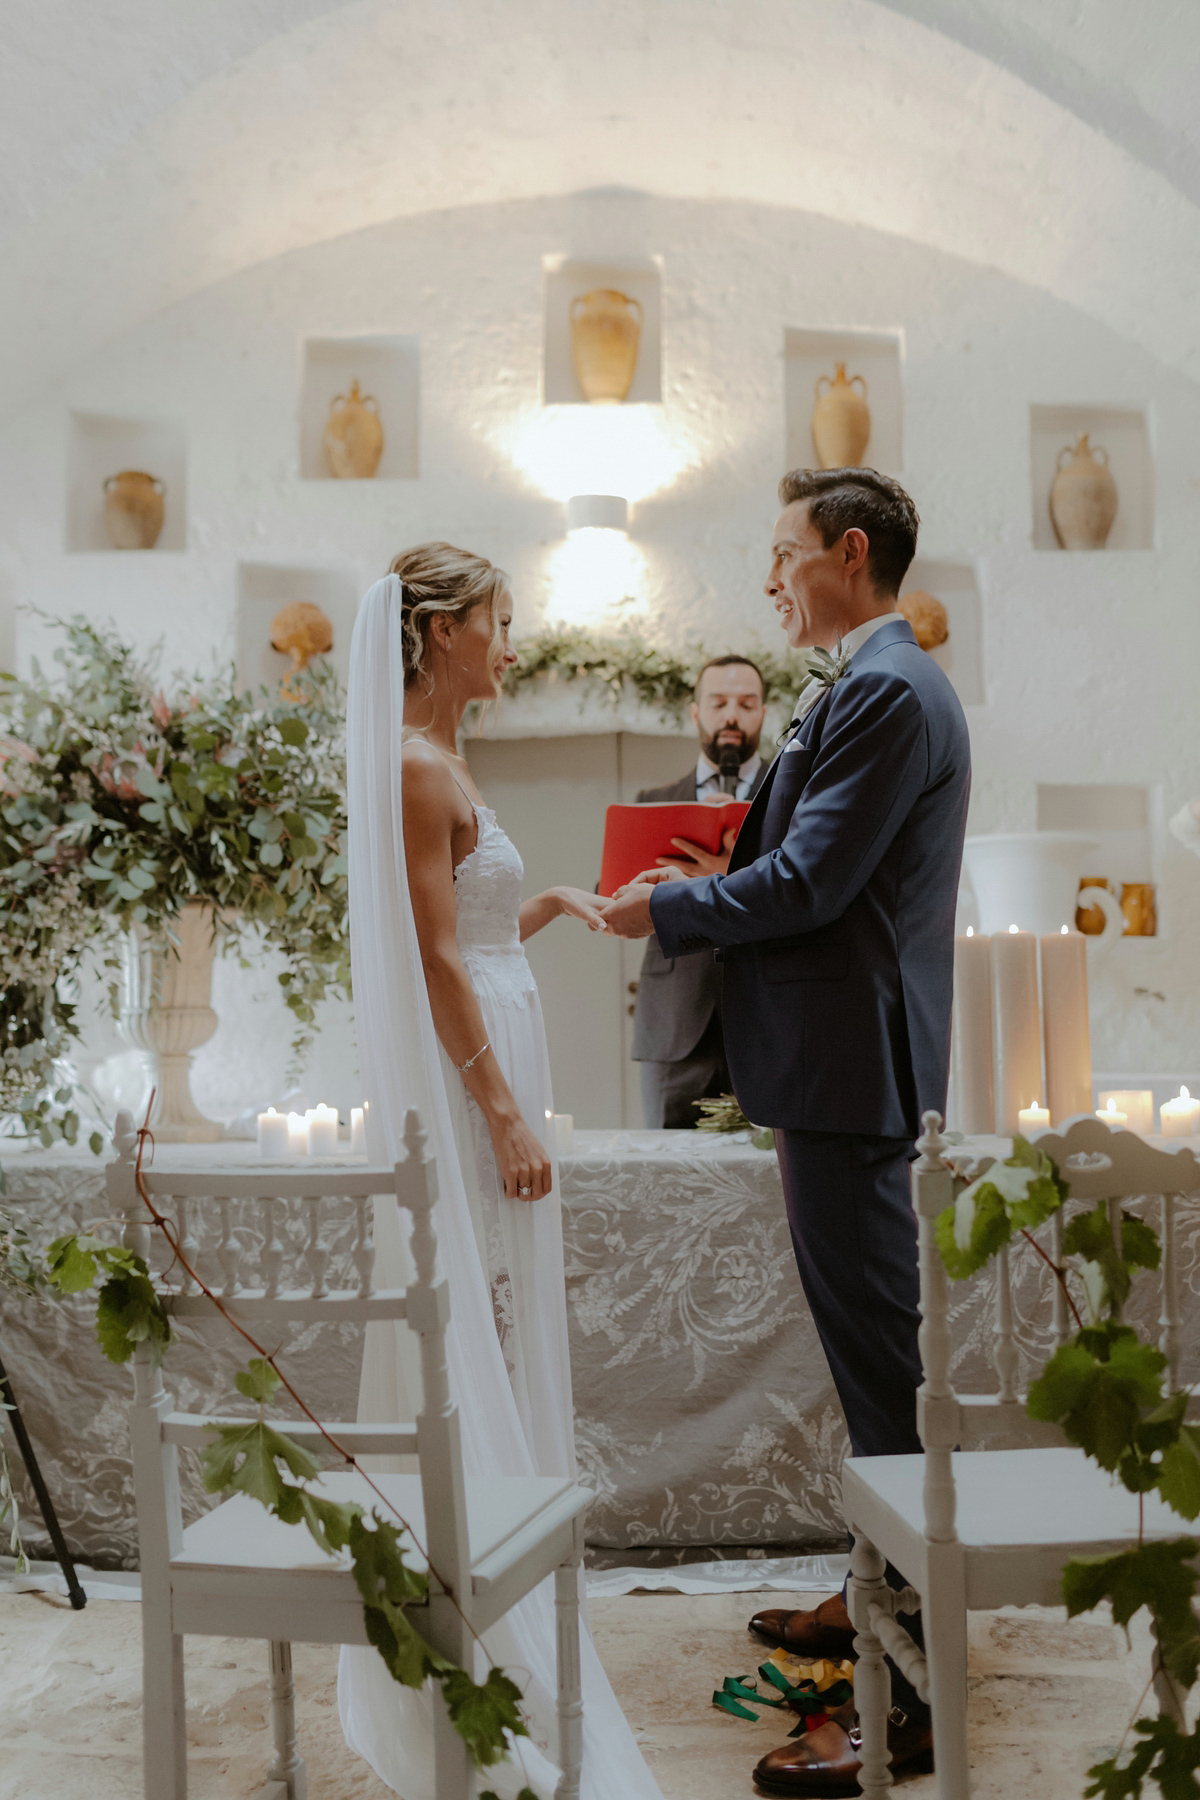 Erica wears a Grace Loves Lace gown for her elegant and bohemian inspired wedding in the south of Italy. Photography by Cinzia Bruschini.